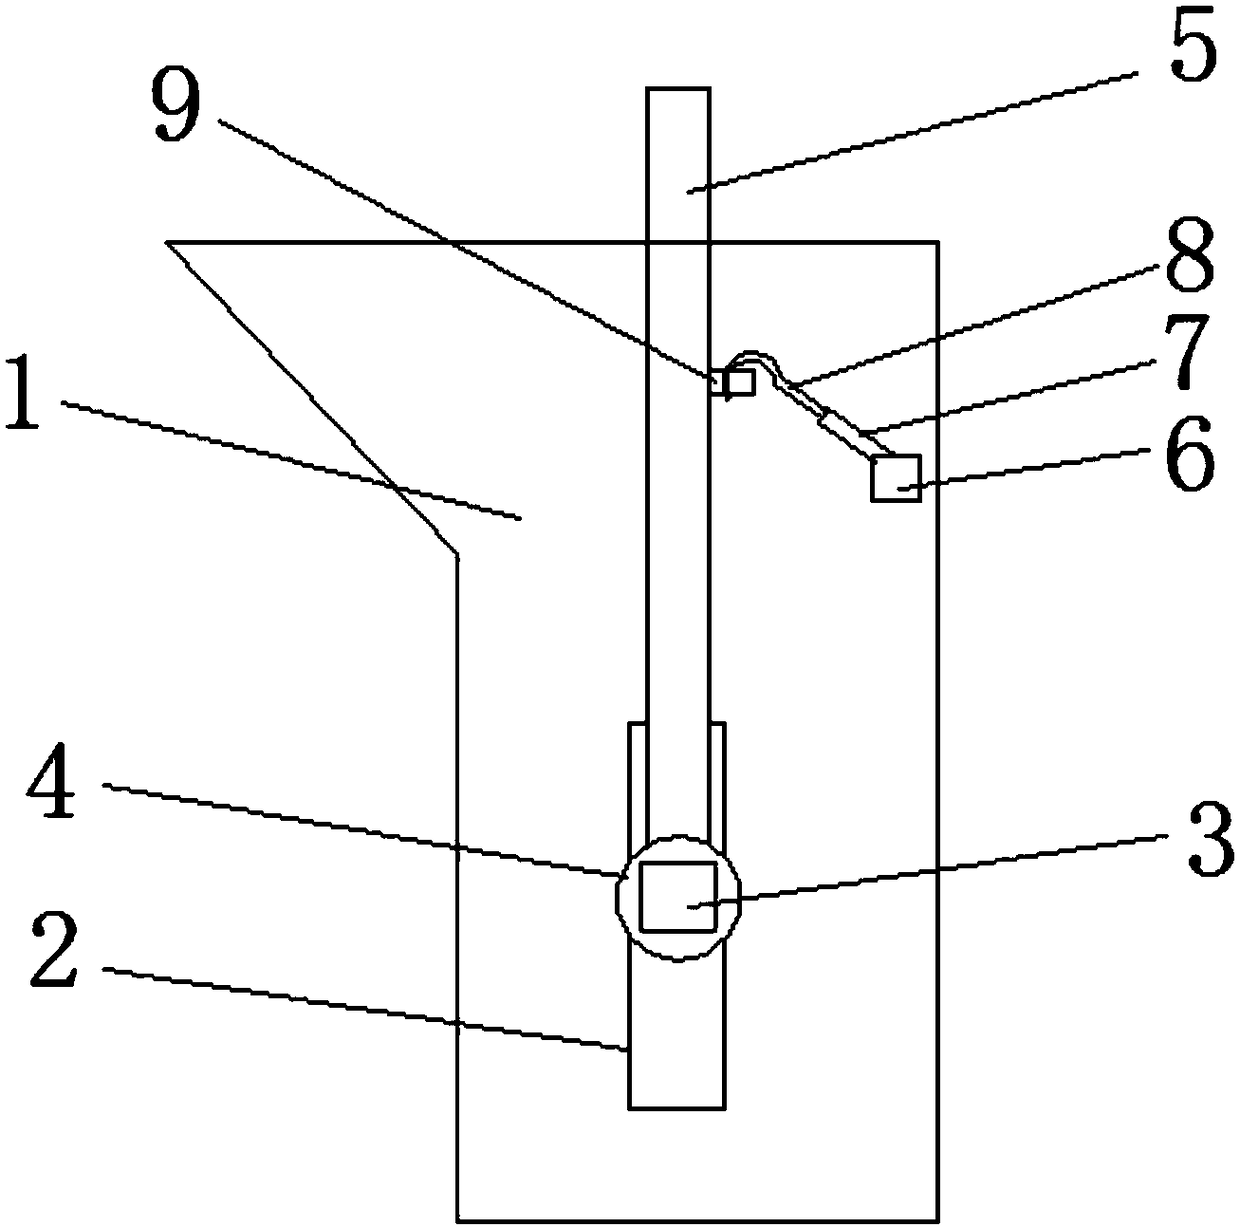 Switching mechanism for lifting bucket of concrete lifting device